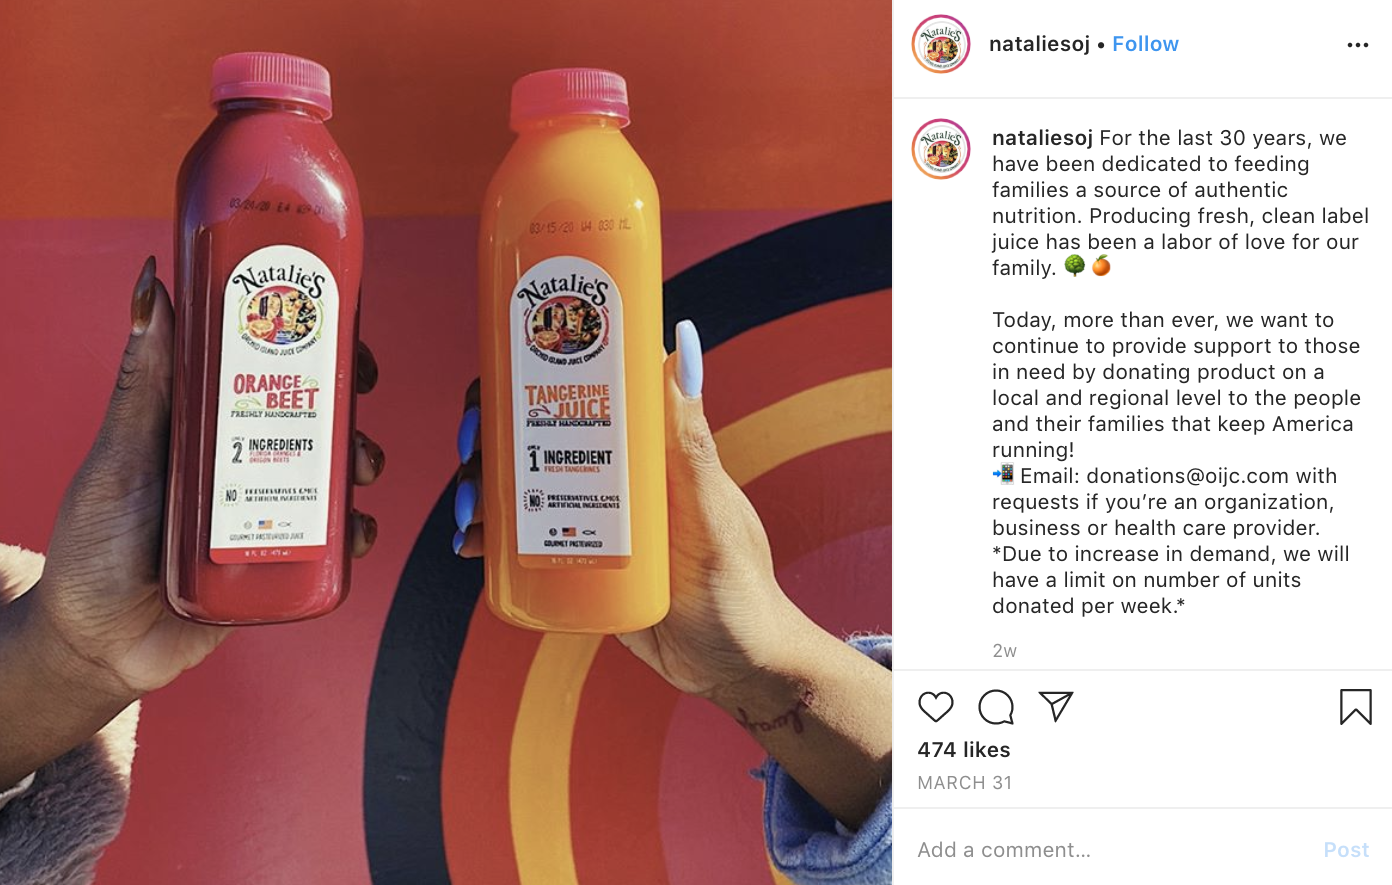 Natalie’s Juice accepting requests for donations on Instagram.